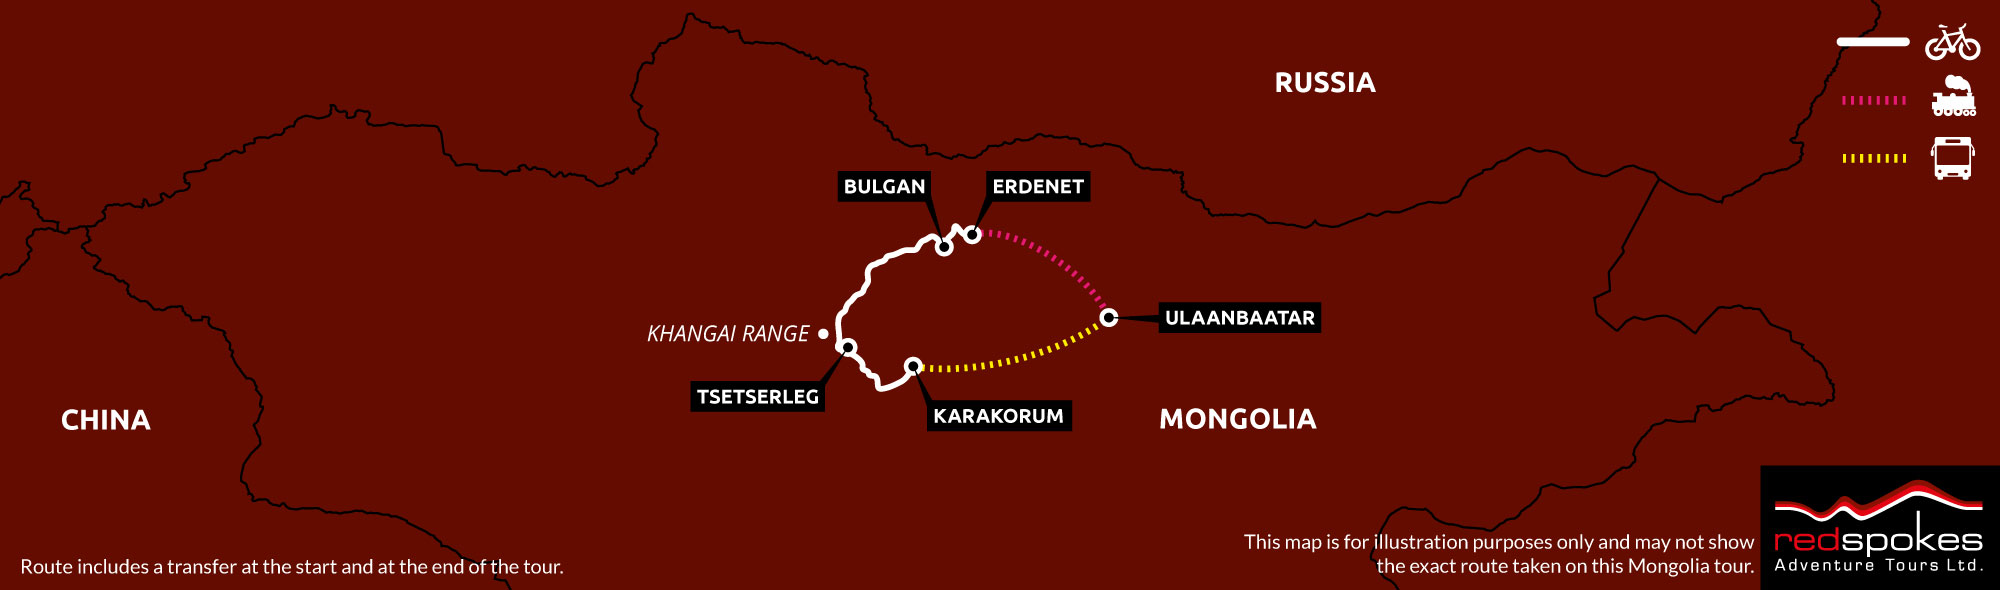 Example route for this Mongolia cycling holiday